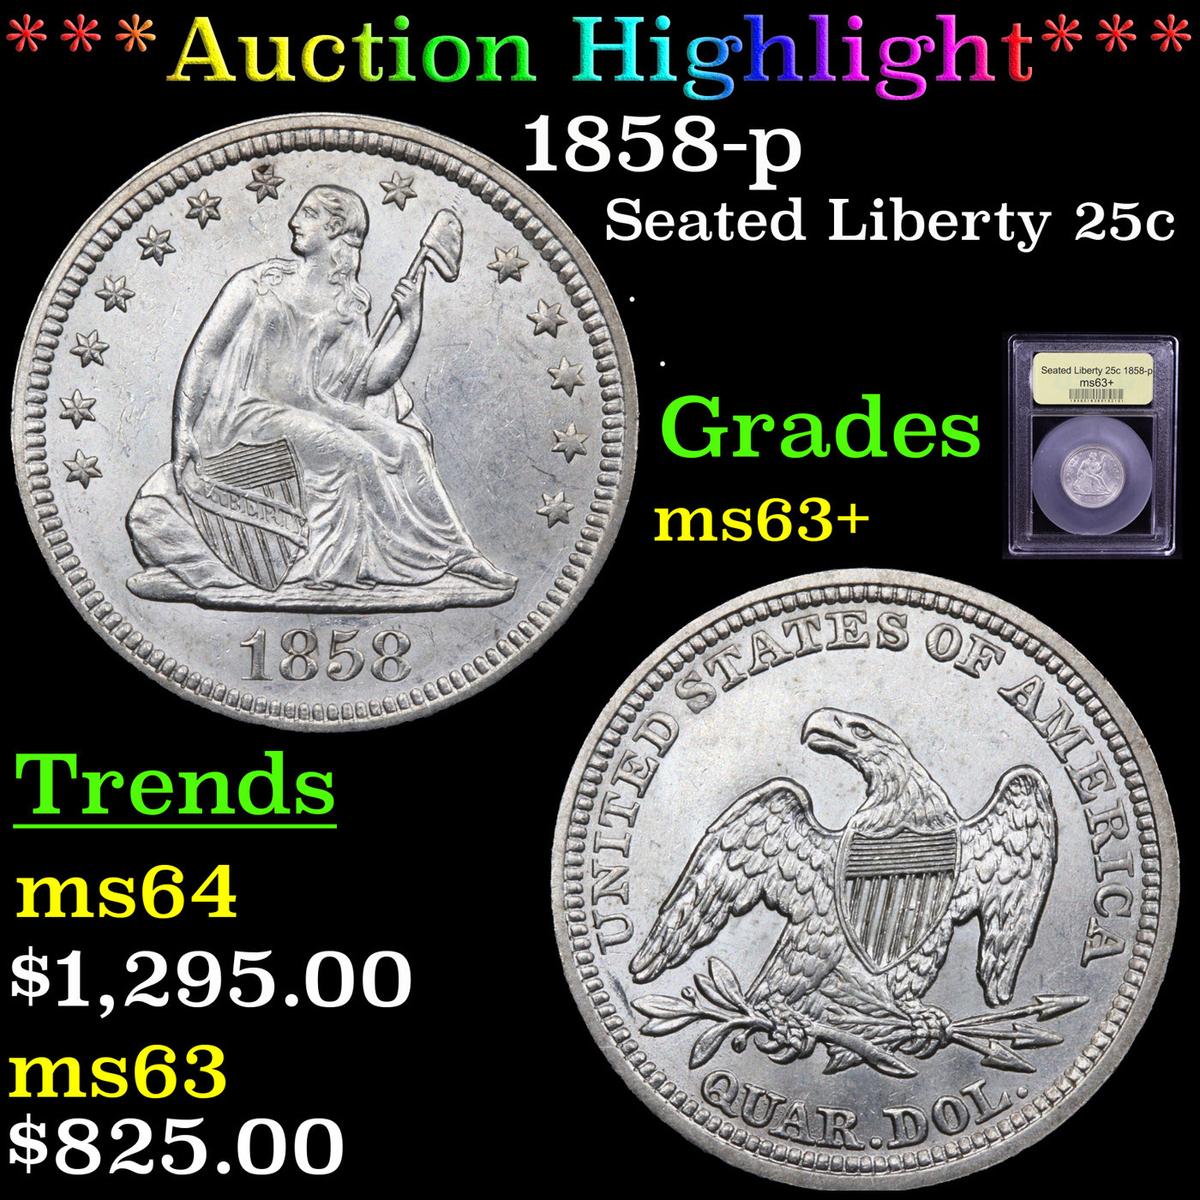 ***Auction Highlight*** 1858-p Seated Liberty Quarter 25c Graded Select+ Unc By USCG (fc)